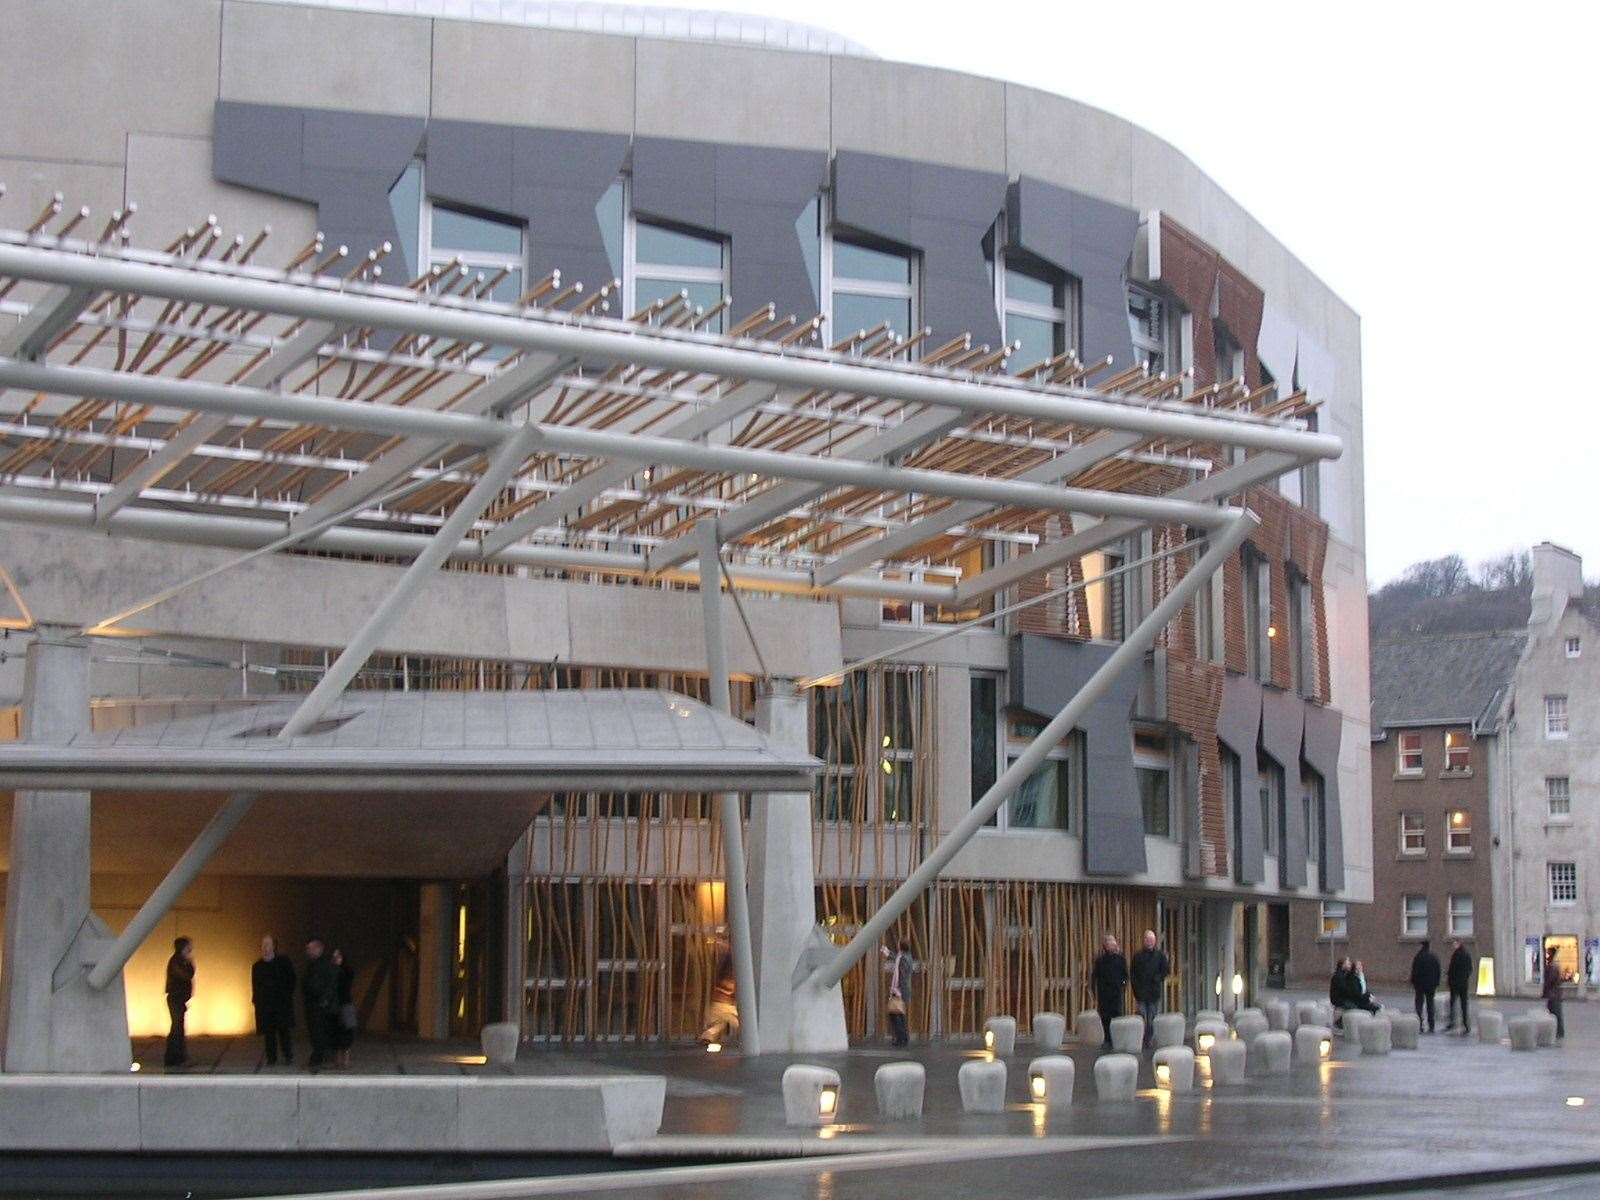 The petition was lodged at the Scottish Parliament this week